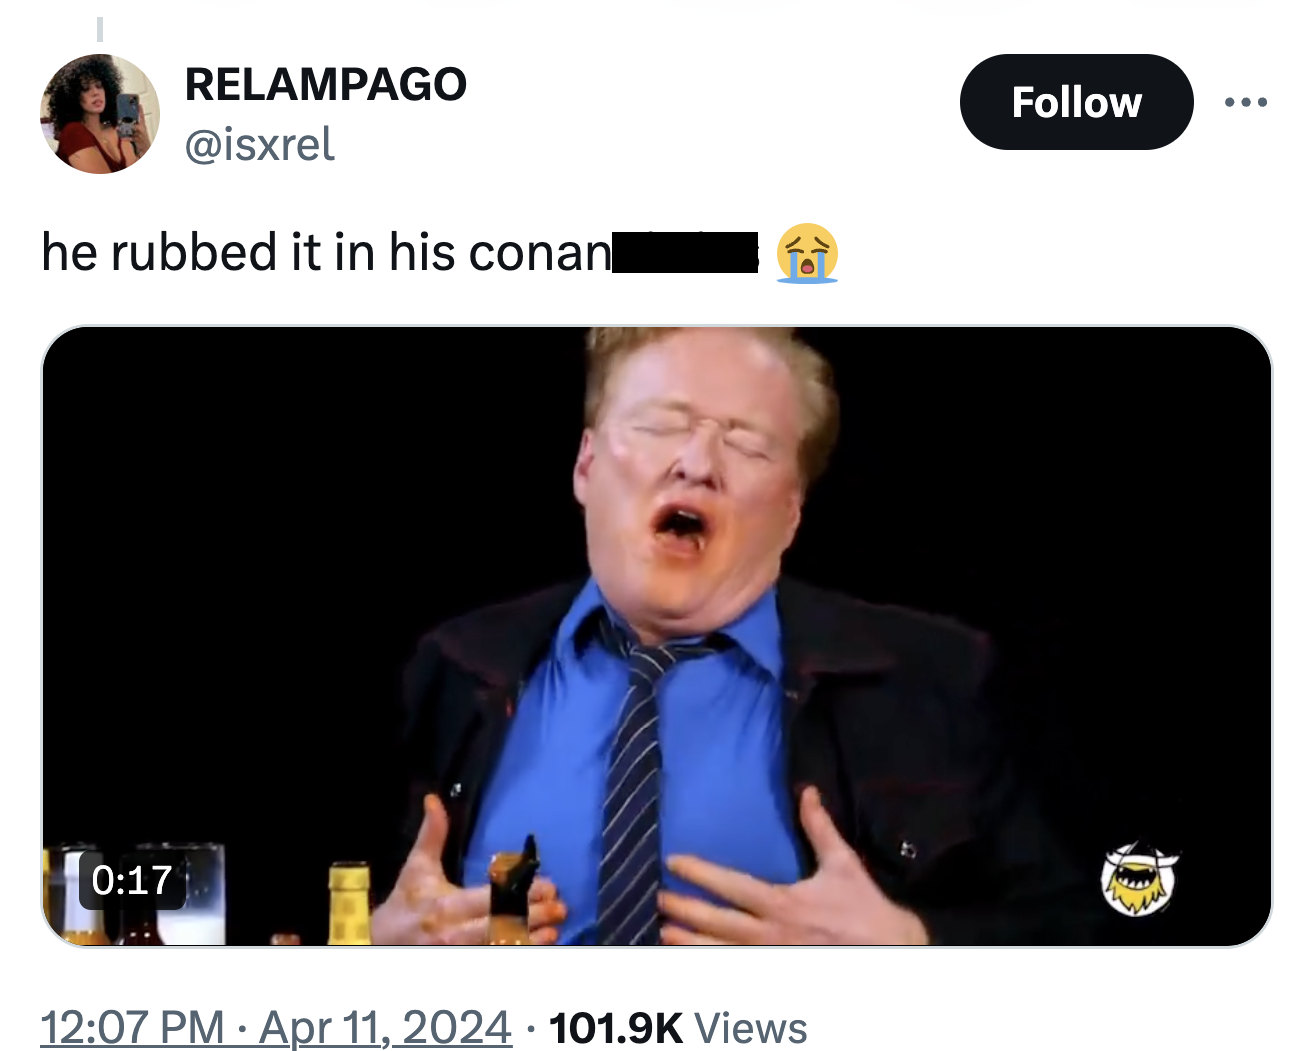 photo caption - Relampago he rubbed it in his conan Views